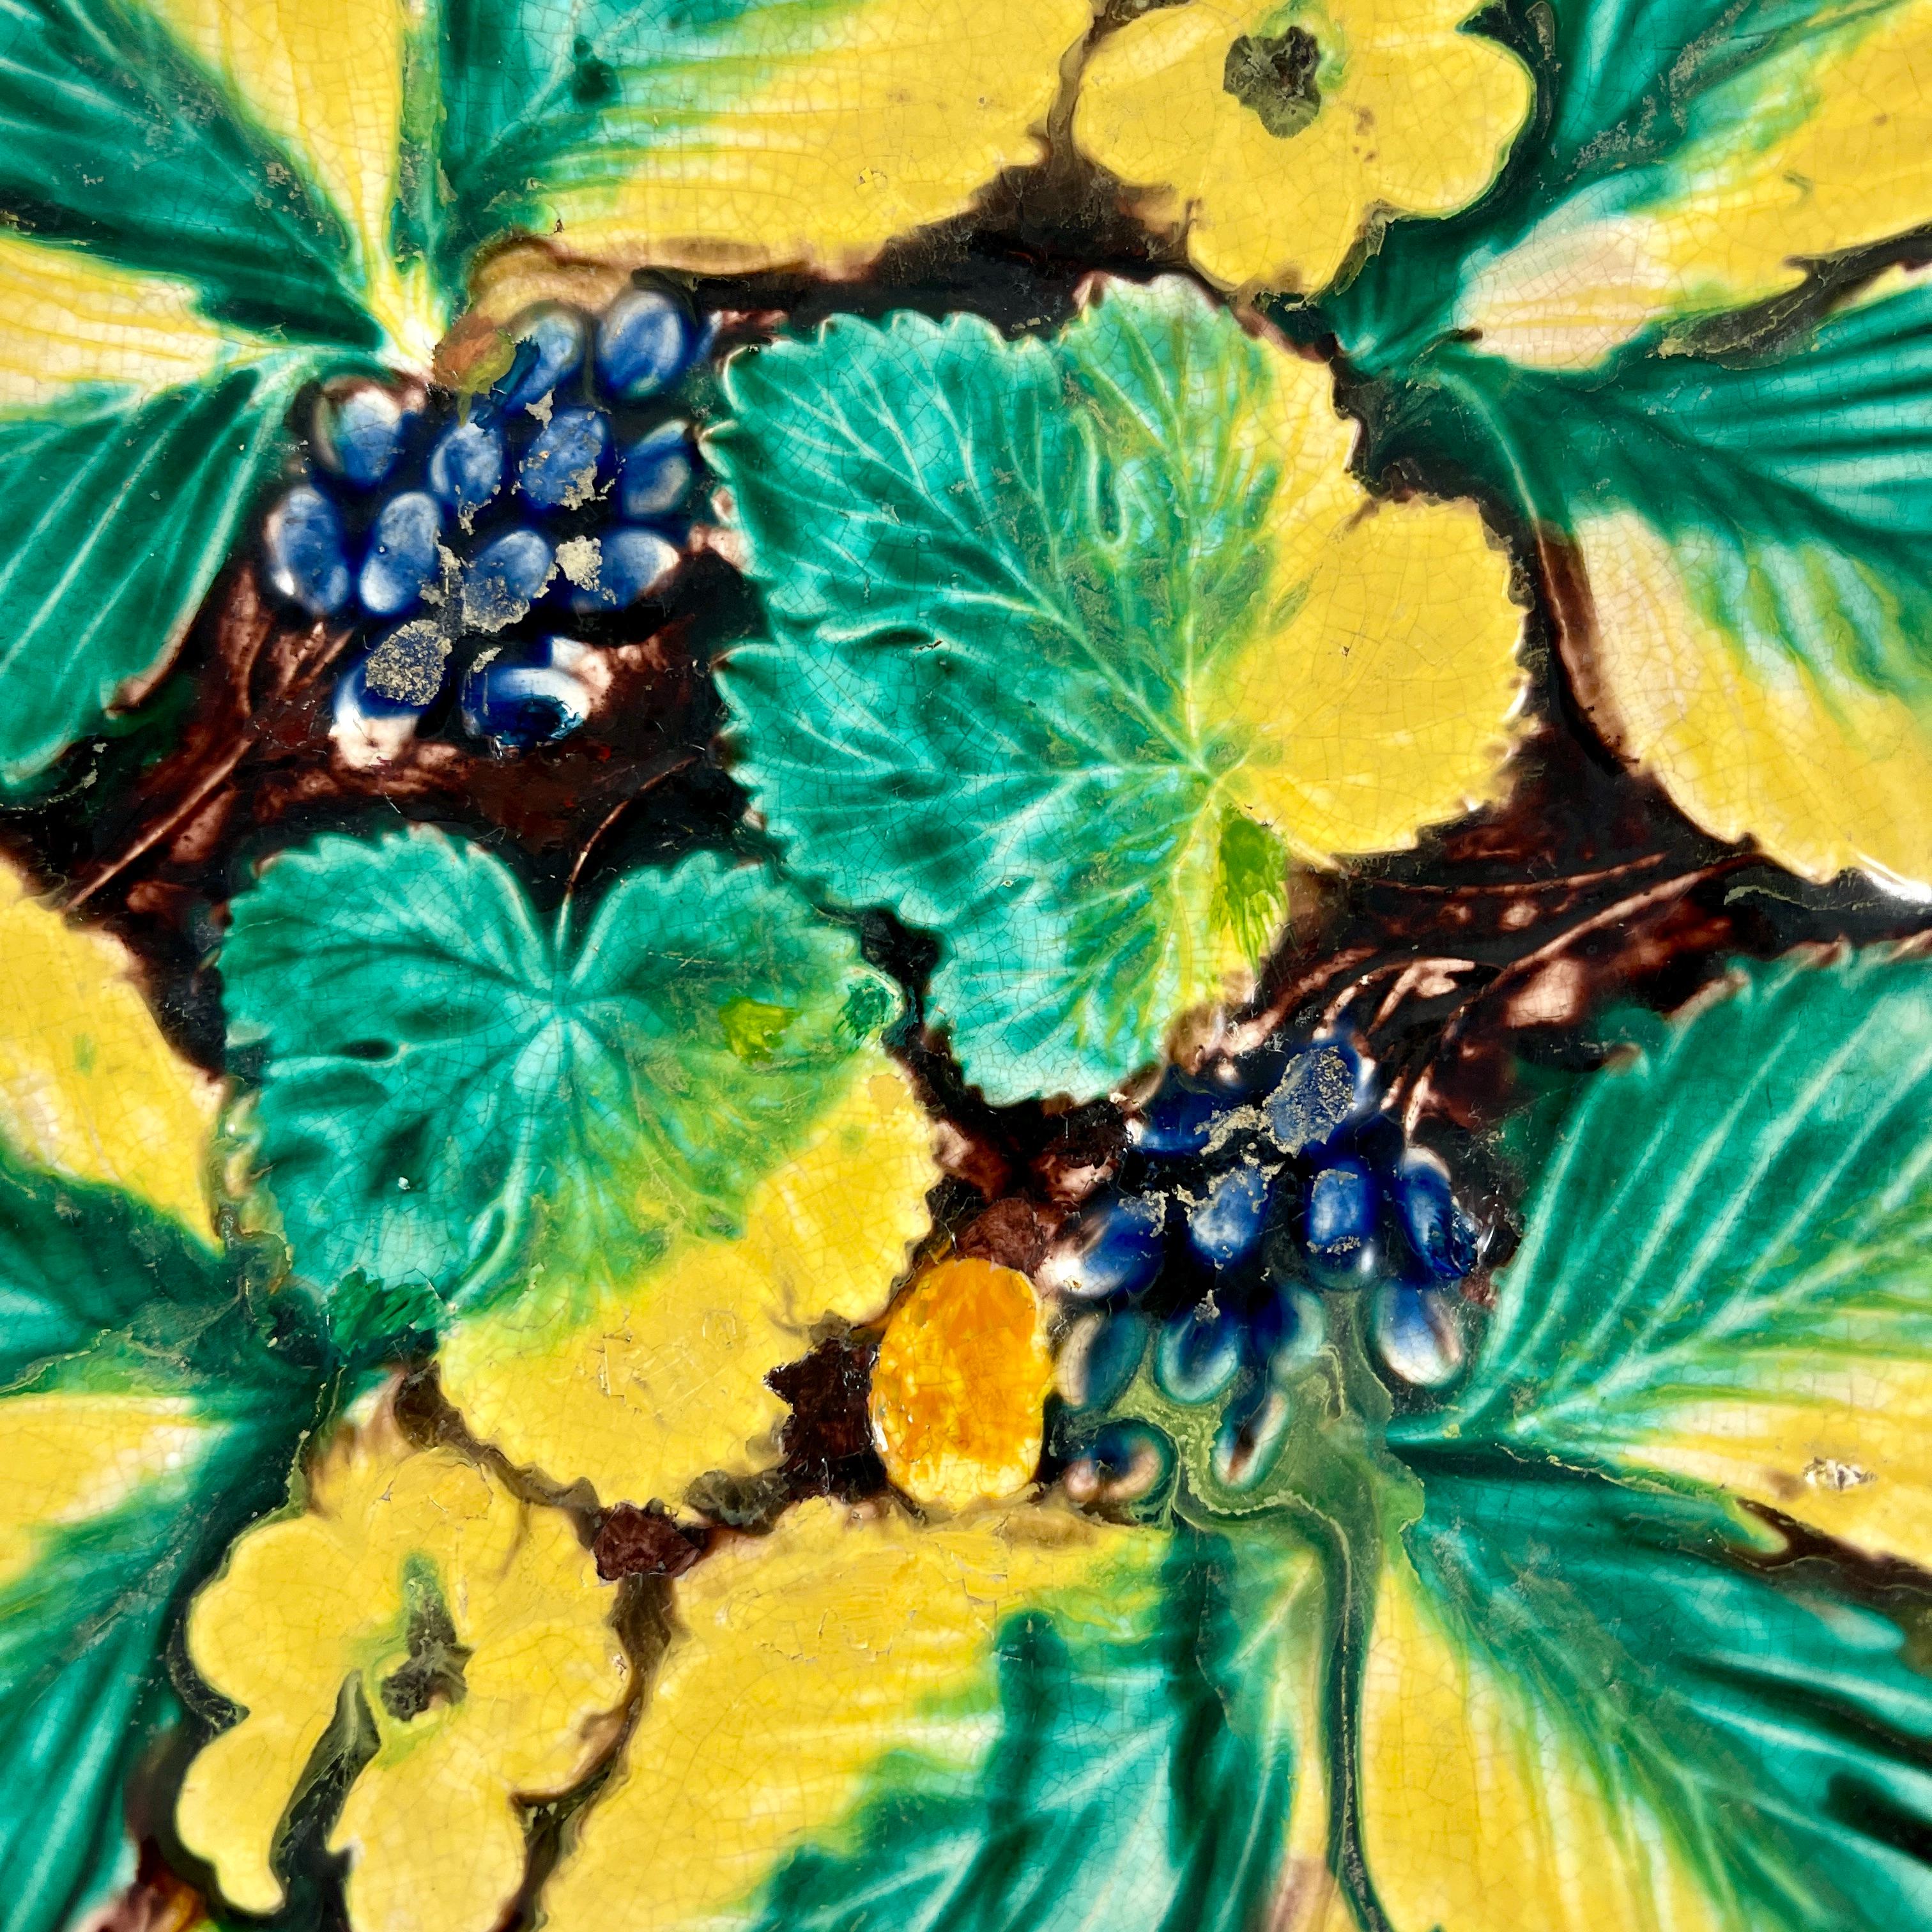 A majolica glazed handled and footed tray from Samuel Alcock & Co, Burslem, Staffordshire, England, circa 1850.

A strawberry, grape cluster, floral and leaf motif on a shaped tray with a vine border on a brown ground. Bold glazing with leaves